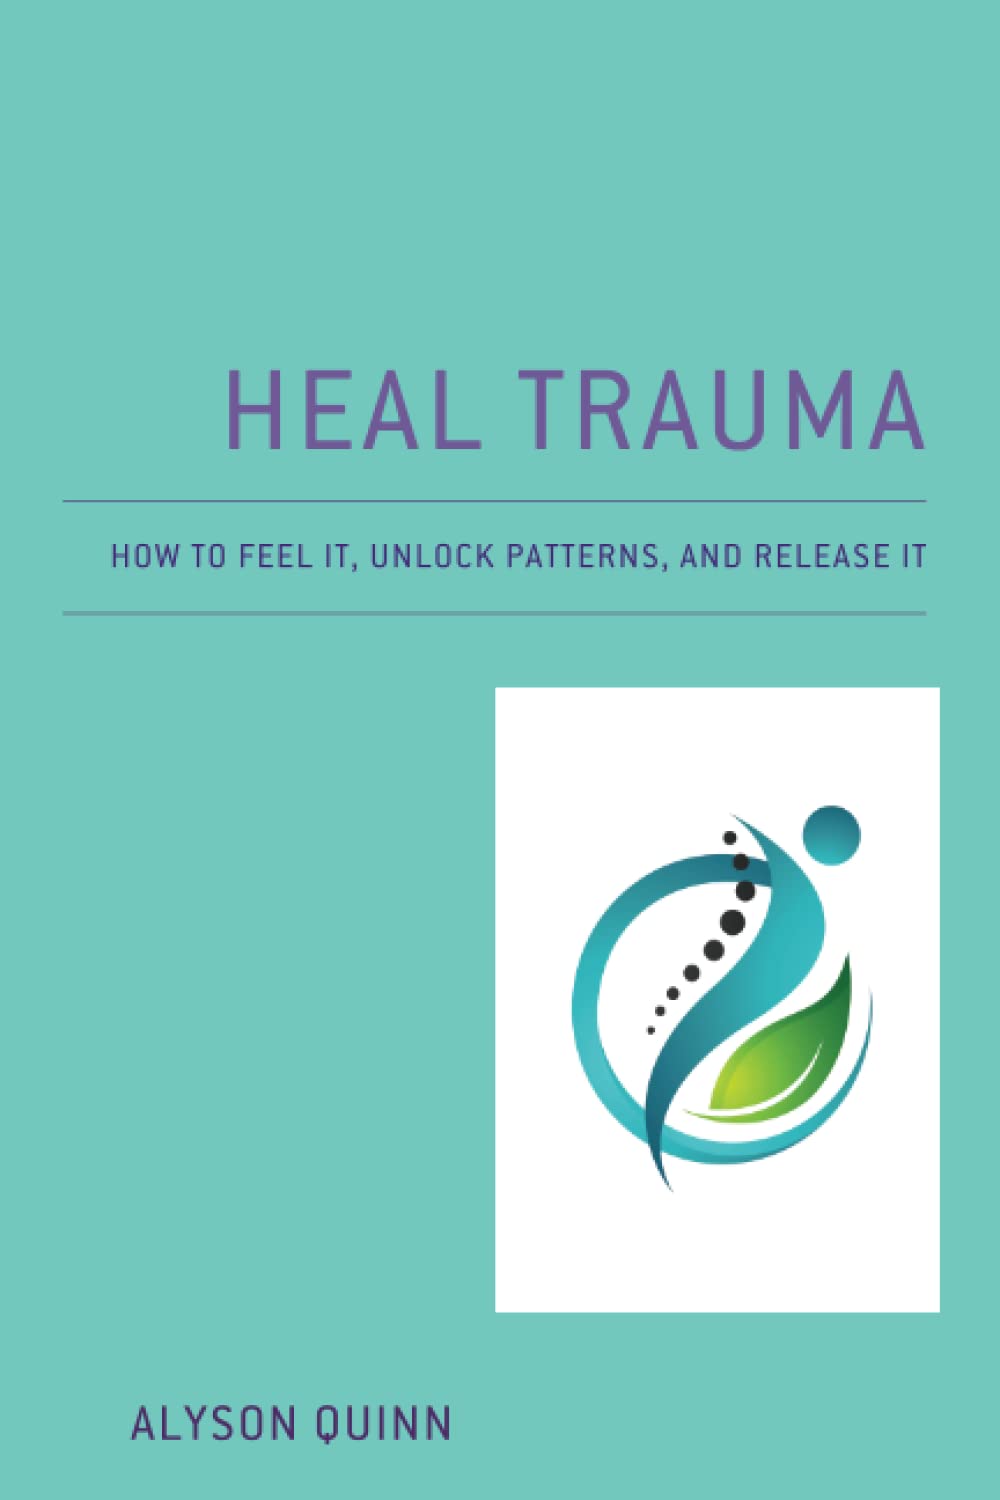 Heal Trauma: How to Feel It, Unlock Patterns and Release It by Alyson Quinn, book cover